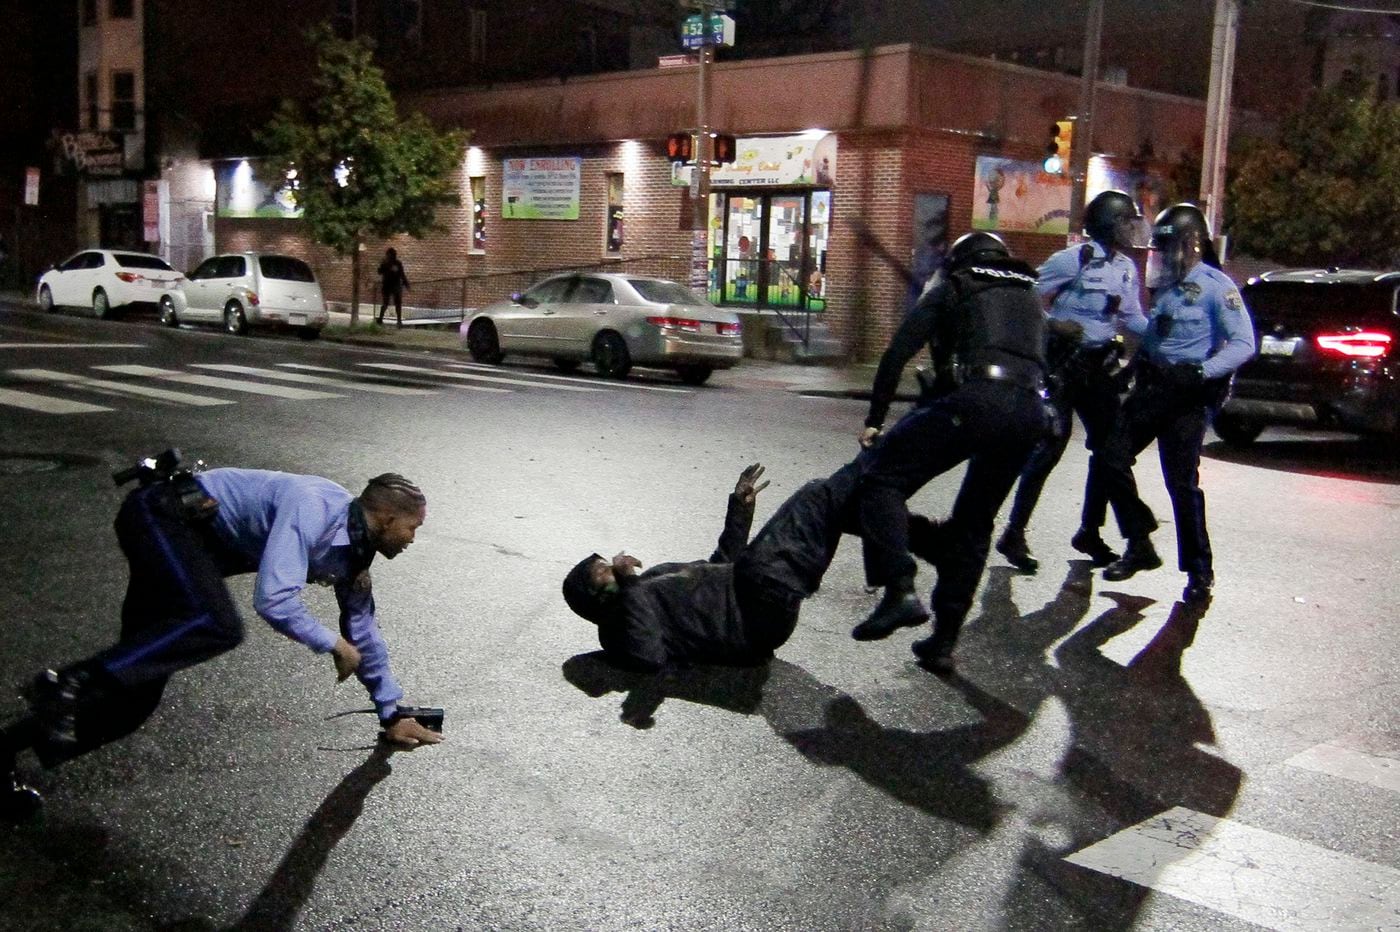 Fatal Police Shooting Of Walter Wallace Jr Prompts Heated Overnight Protests In West Philly